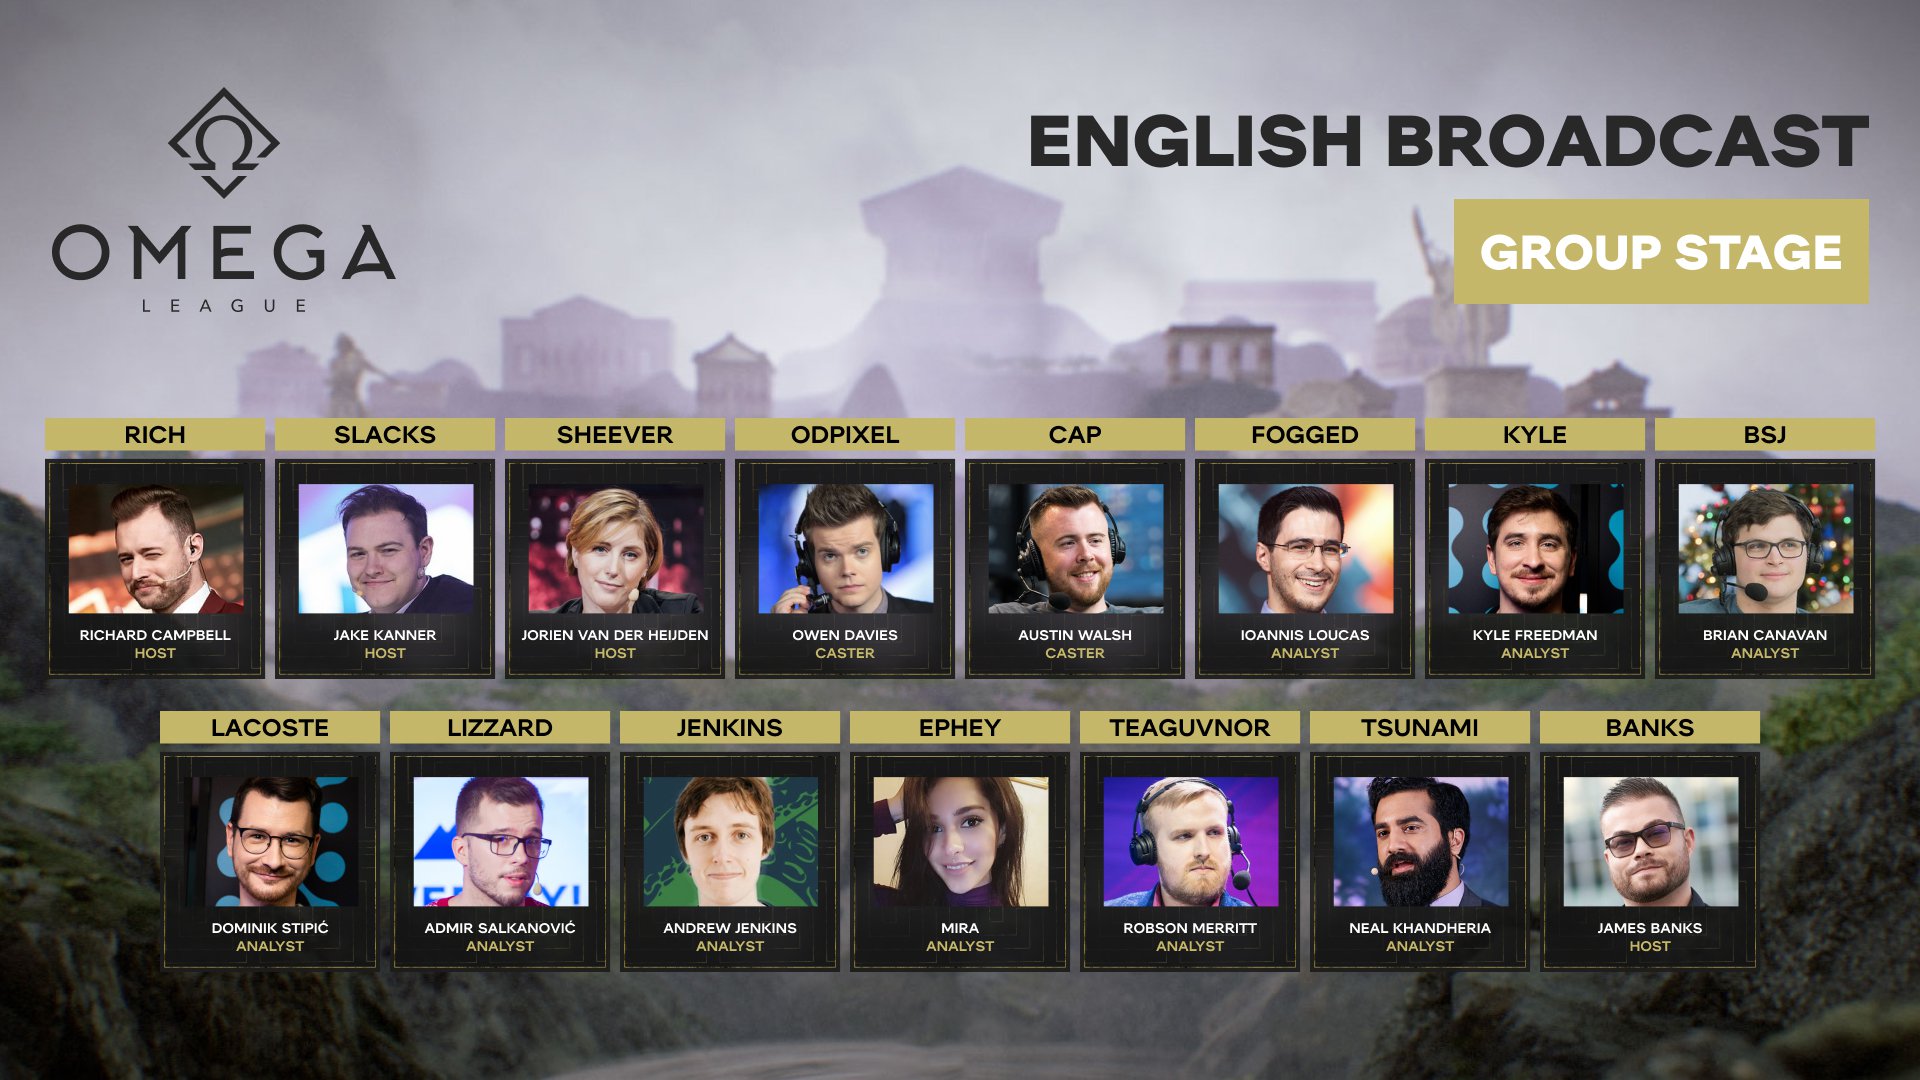 English broadcast Group Stage